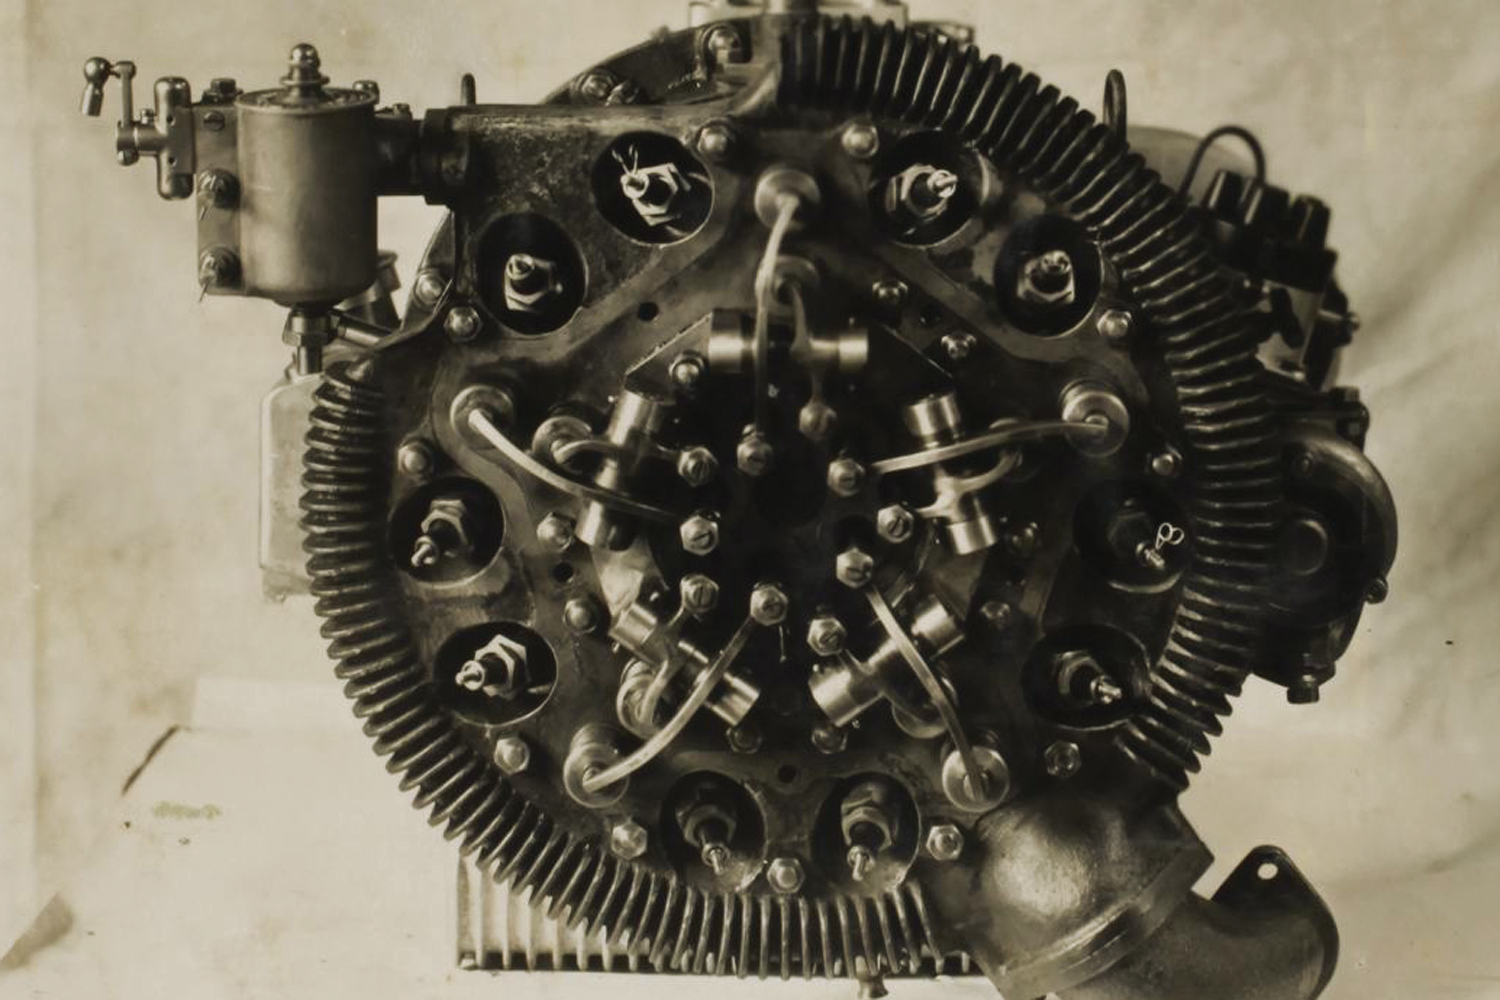 Car engine. (Image: Museums Victoria Collection)